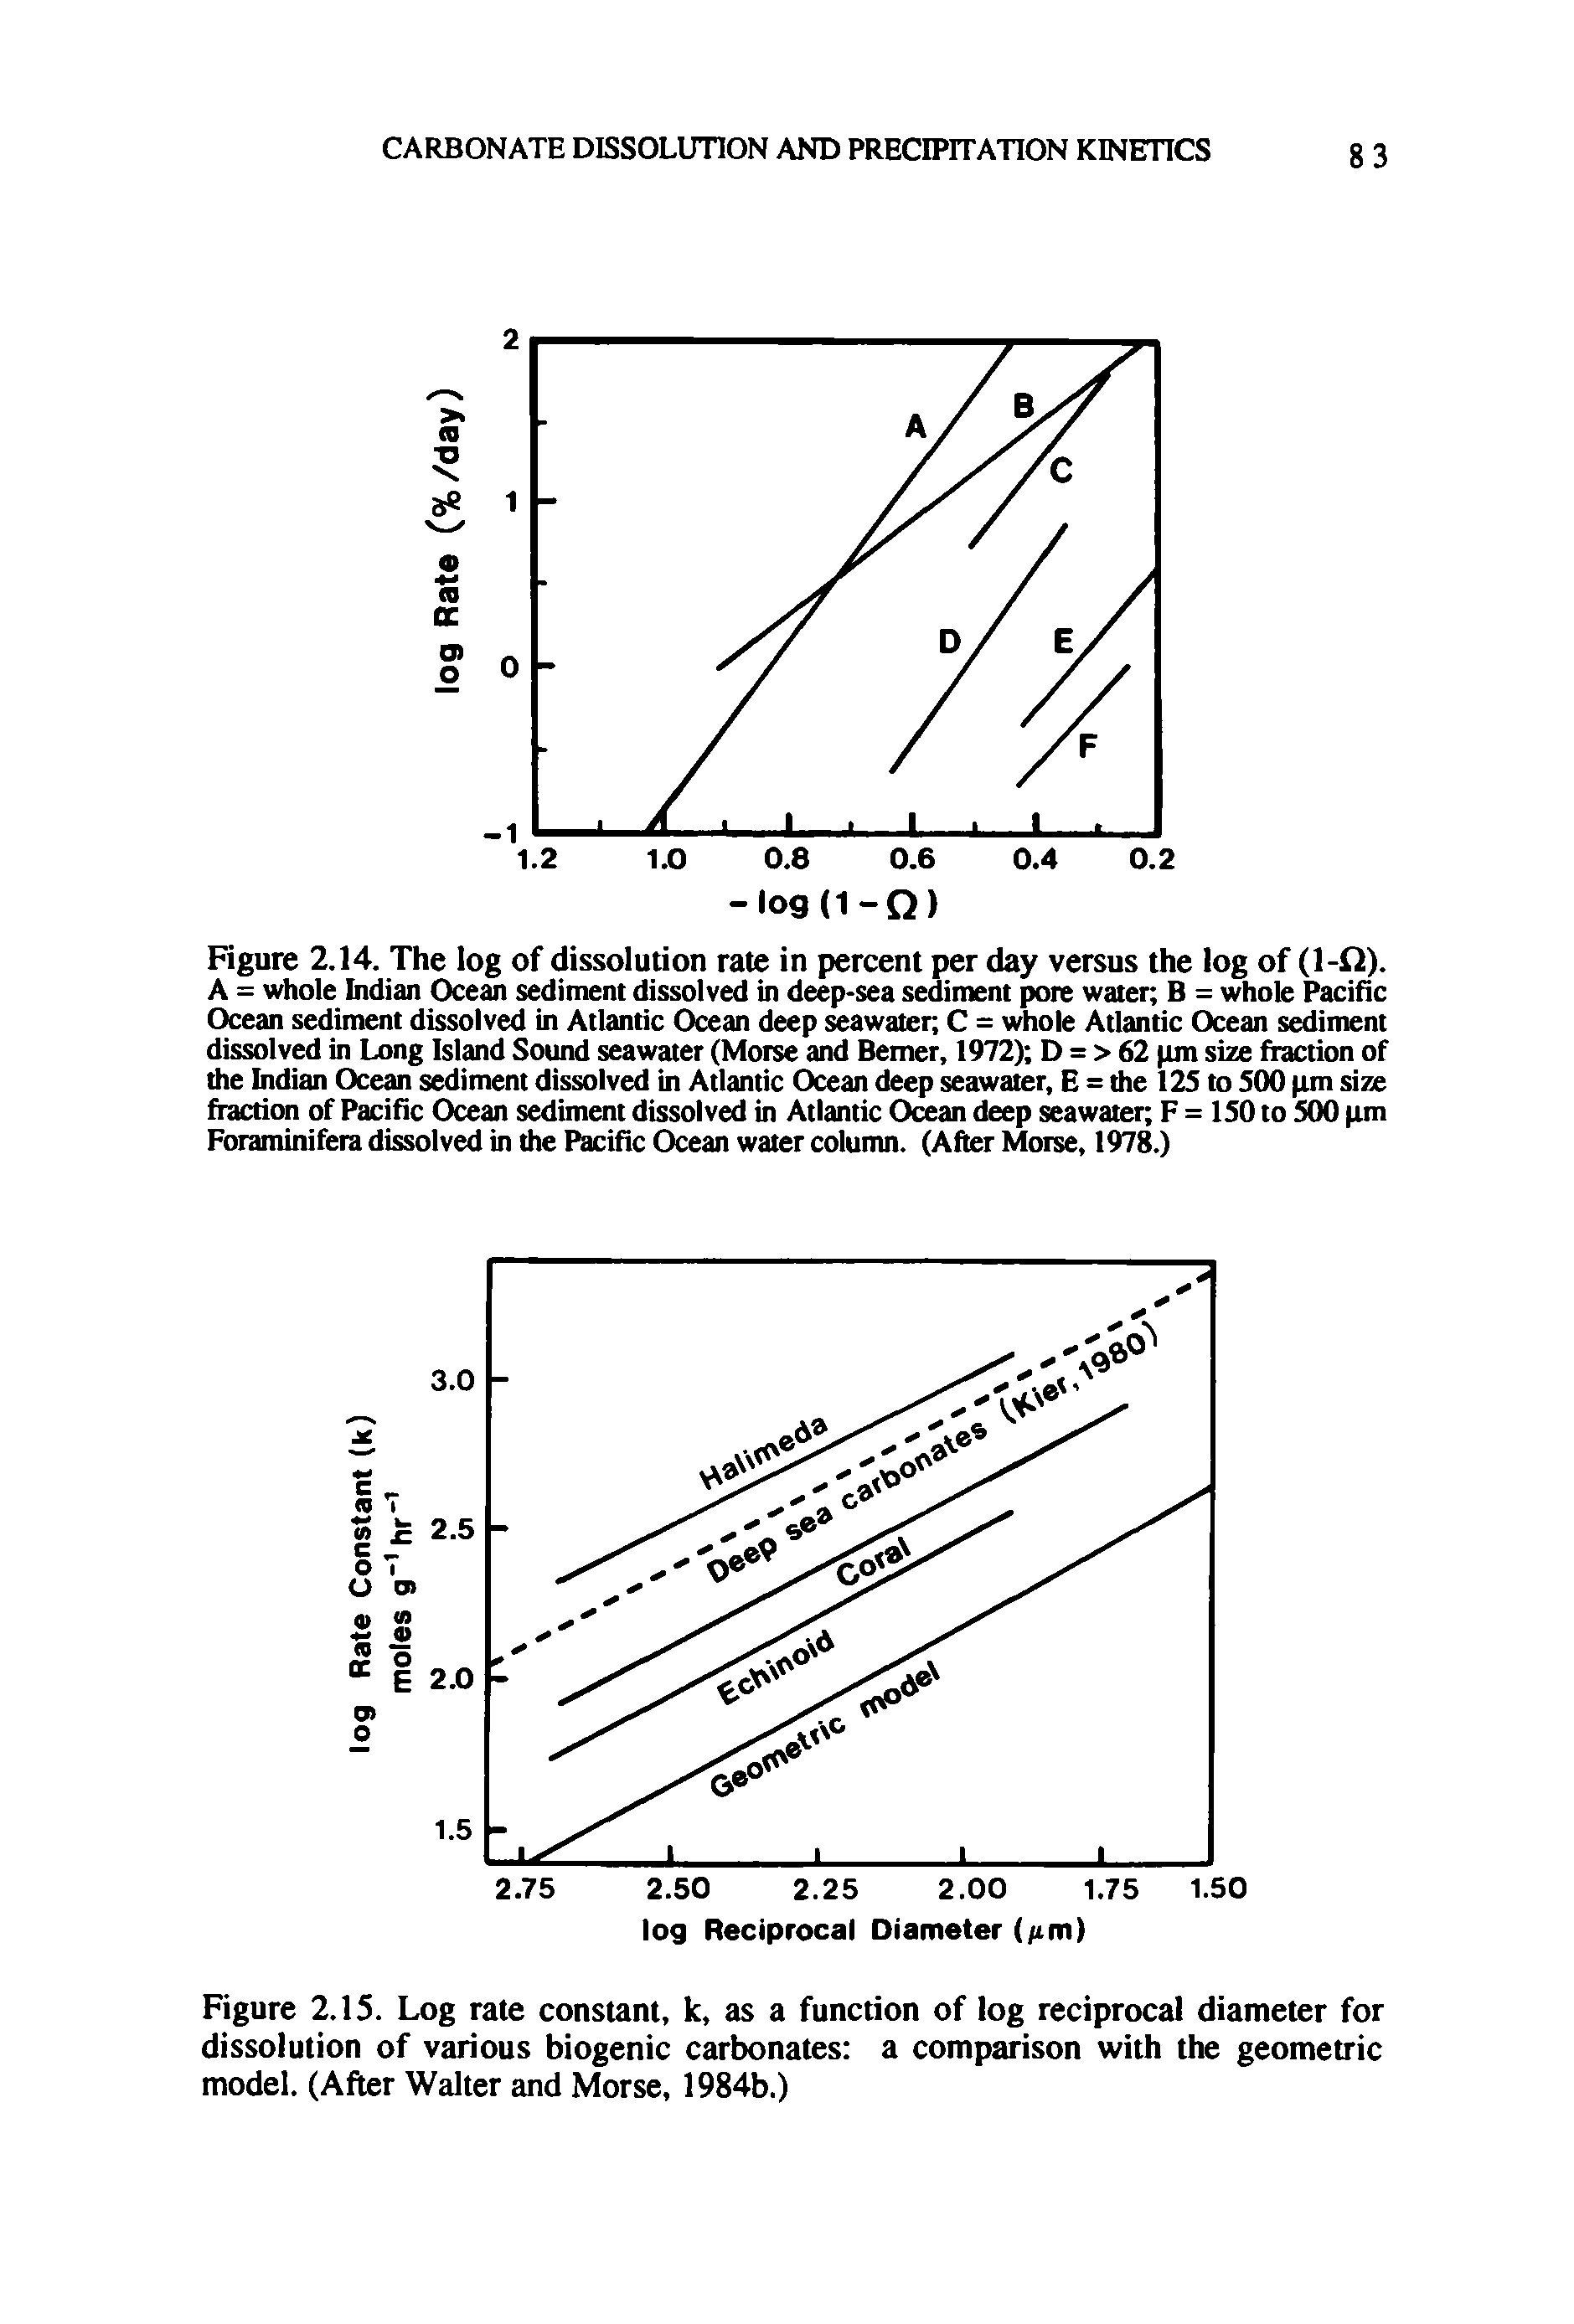 Figure 2.14. The log of dissolution rate in percent per day versus the log of (1-fi). A = whole Indian Ocean sediment dissolved in deep-sea sediment pore water B = whole Pacific Ocean sediment dissolved in Atlantic Ocean deep seawater C = whole Atlantic Ocean sediment dissolved in Long Island Sound seawater (Morse and Berner, 1972) D = > 62 pm size fraction of the Indian Ocean sediment dissolved in Atlantic Ocean deep seawater, E = the 125 to 500 pm size fraction of Pacific Ocean sediment dissolved in Atlantic Ocean deep seawater F = 150 to 500 pm Foraminifera dissolved in the Pacific Ocean water column. (After Morse, 1978.)...